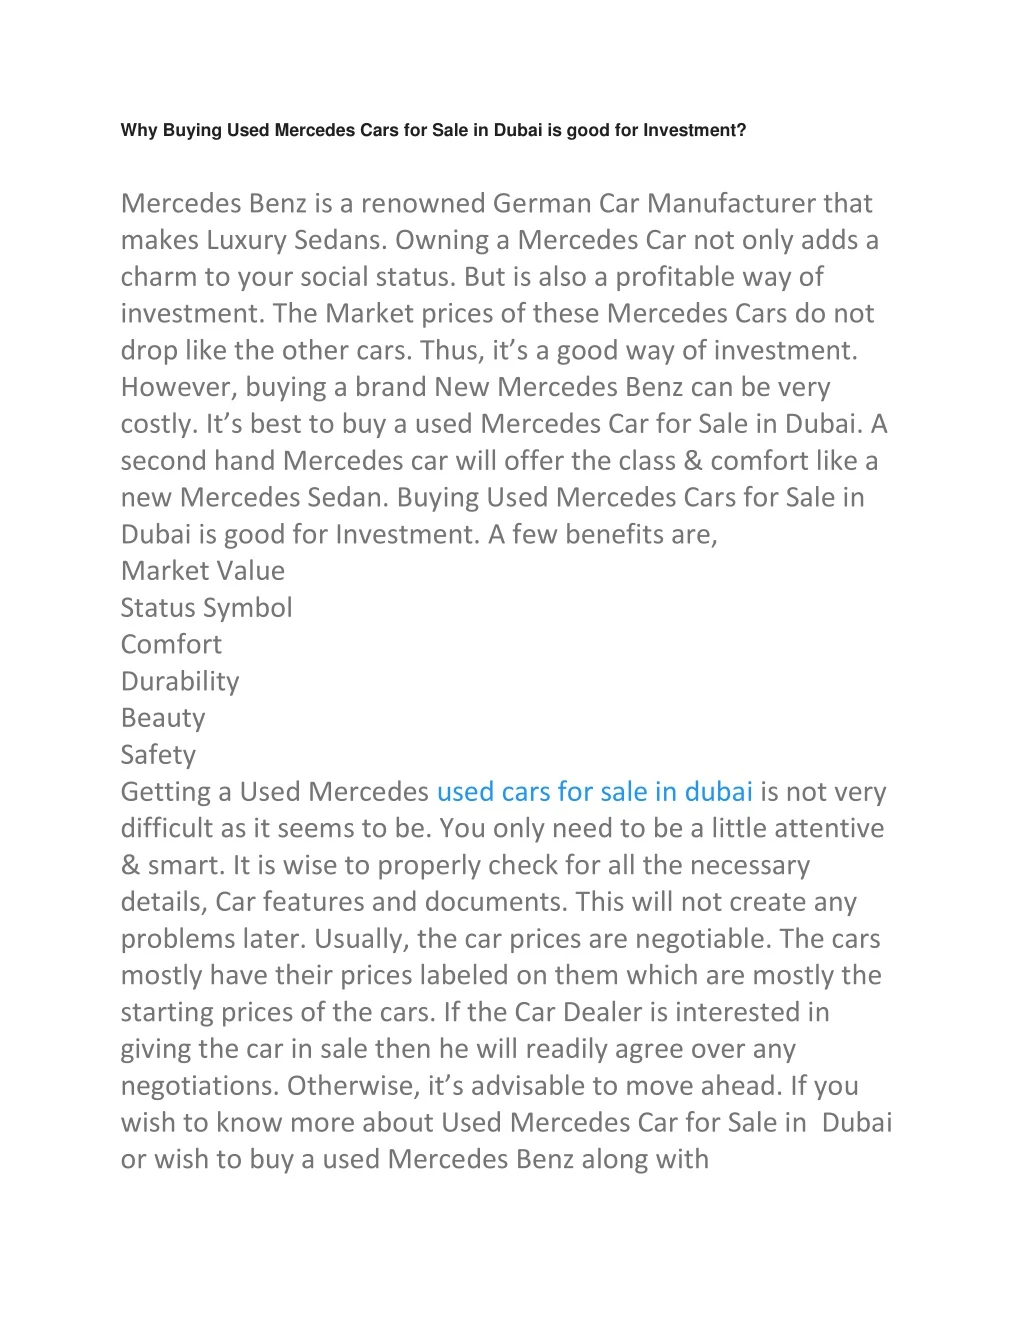 why buying used mercedes cars for sale in dubai